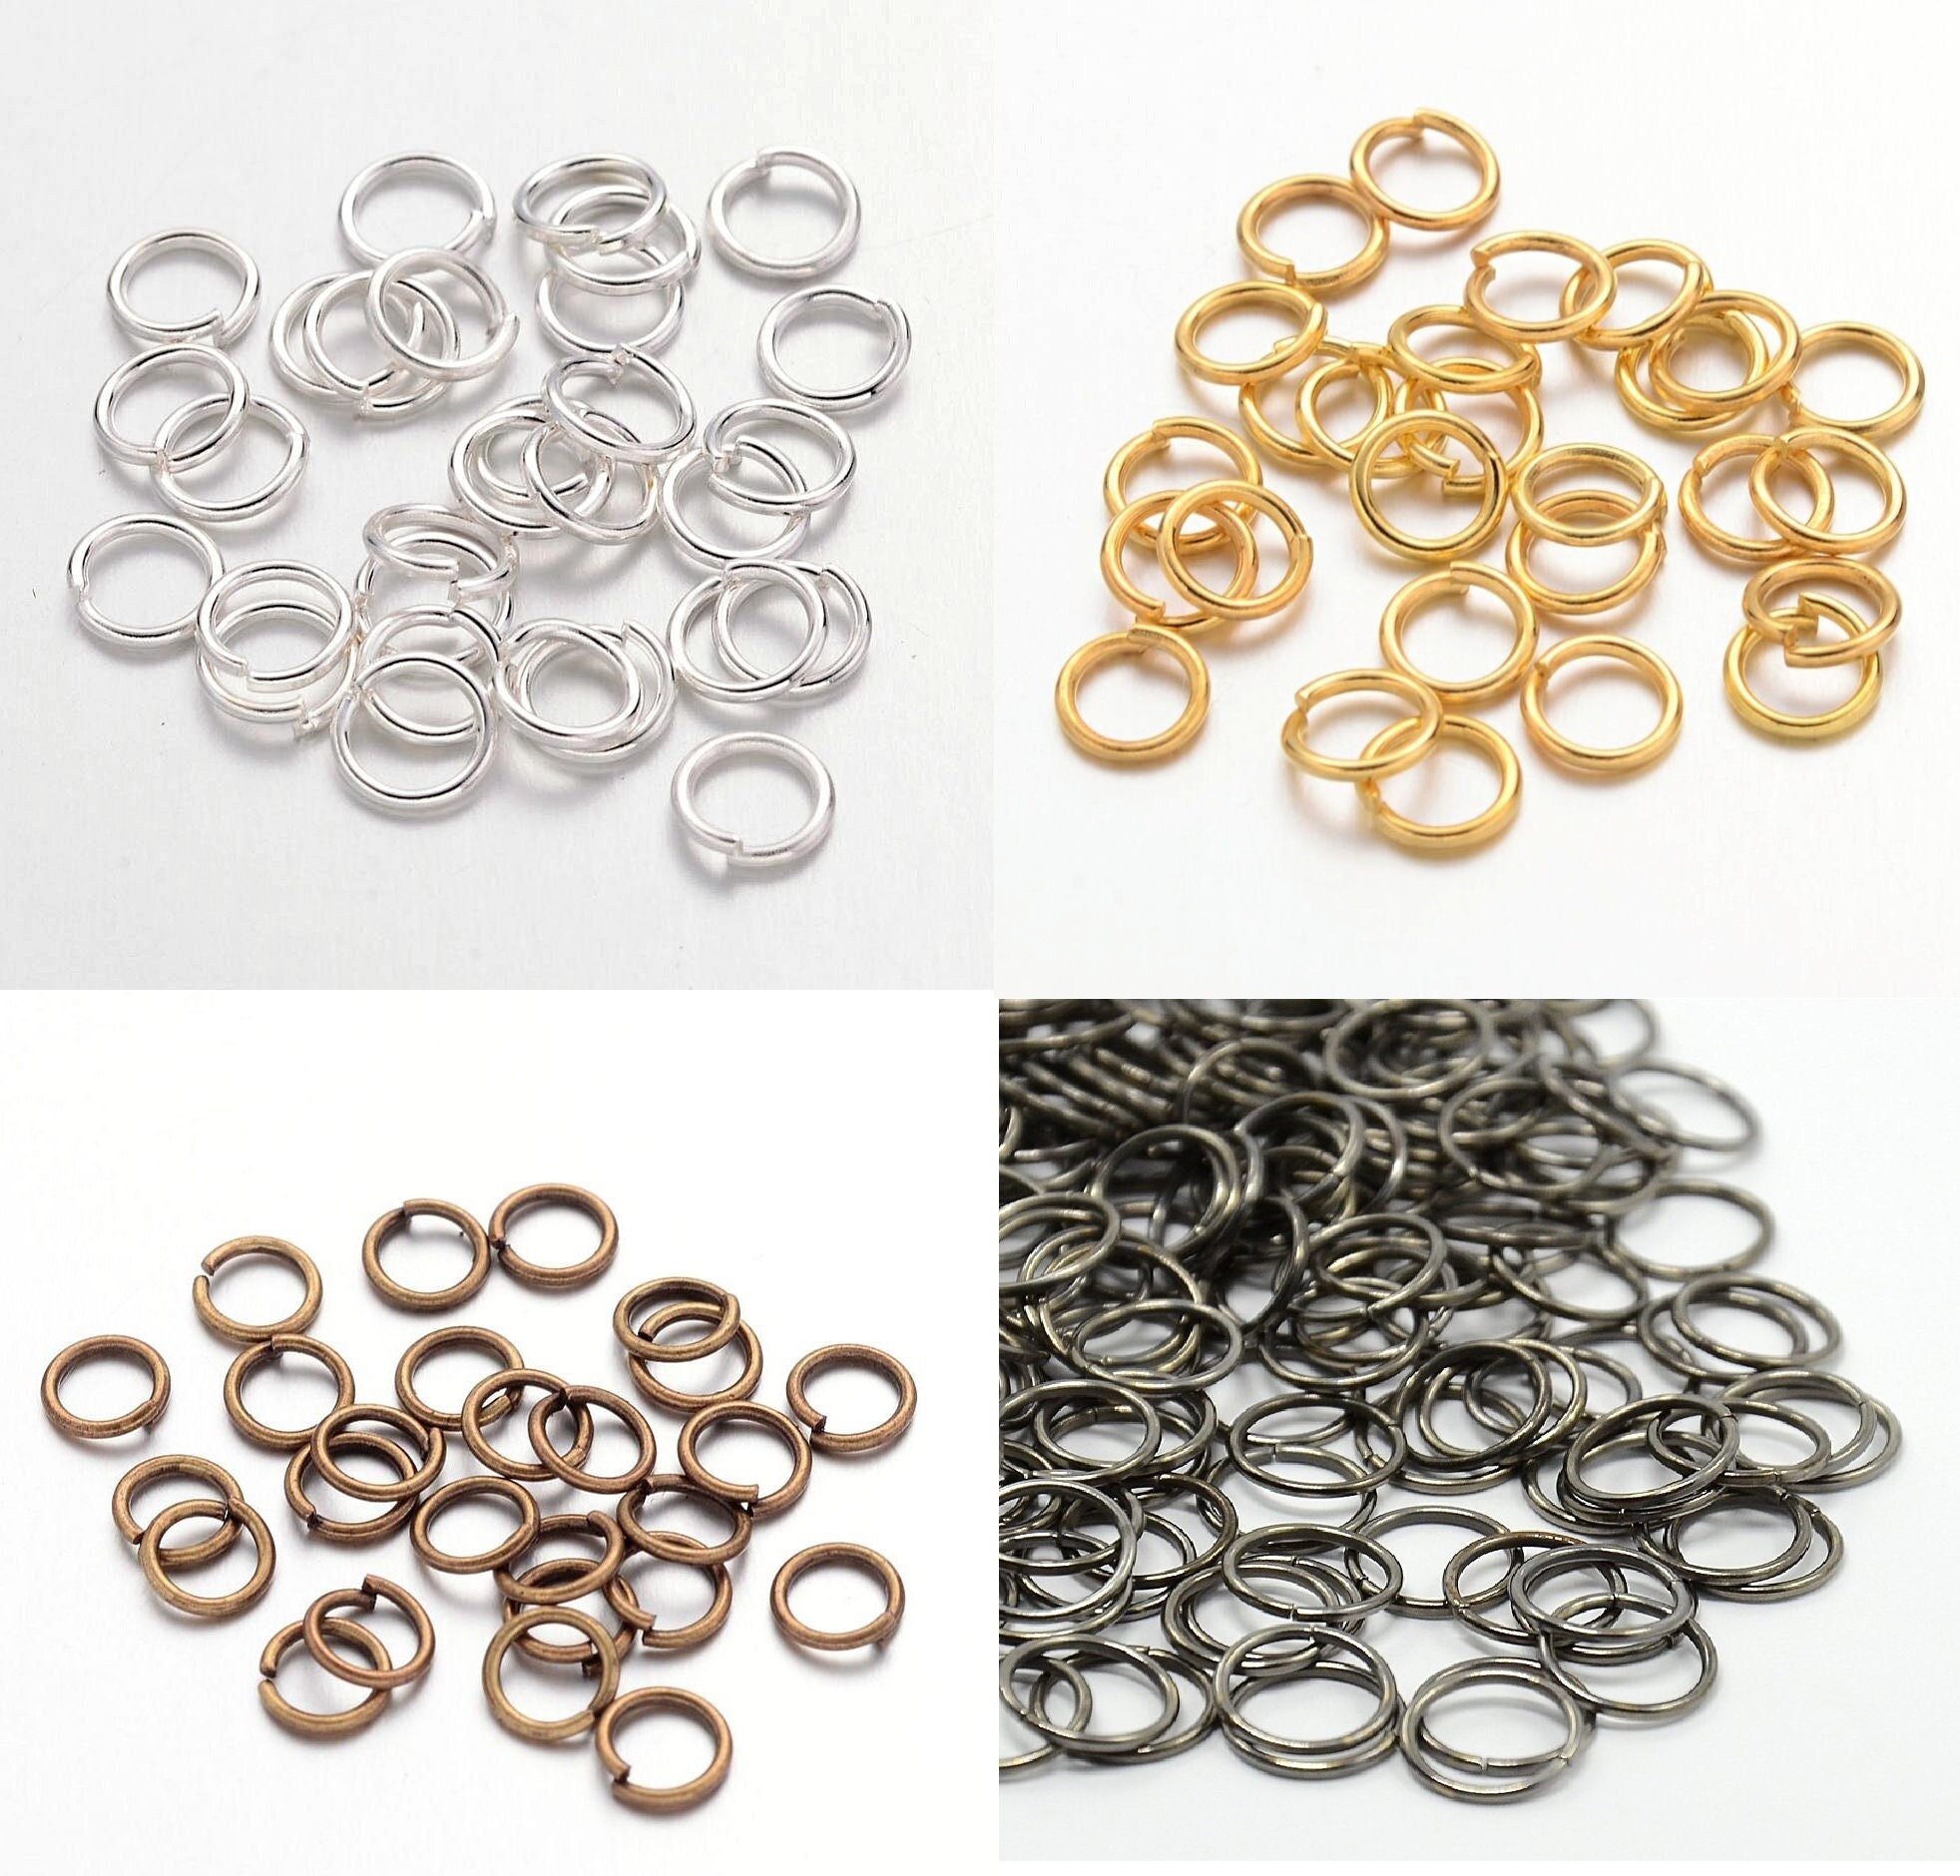 Stainless Steel Jump Rings, 300 Pieces, Open or Closed unsoldered, Choose  Ring Size, 4mm, 5mm, 6mm, 7mm, 8mm, Hypoallergenic, 300 PIECES 